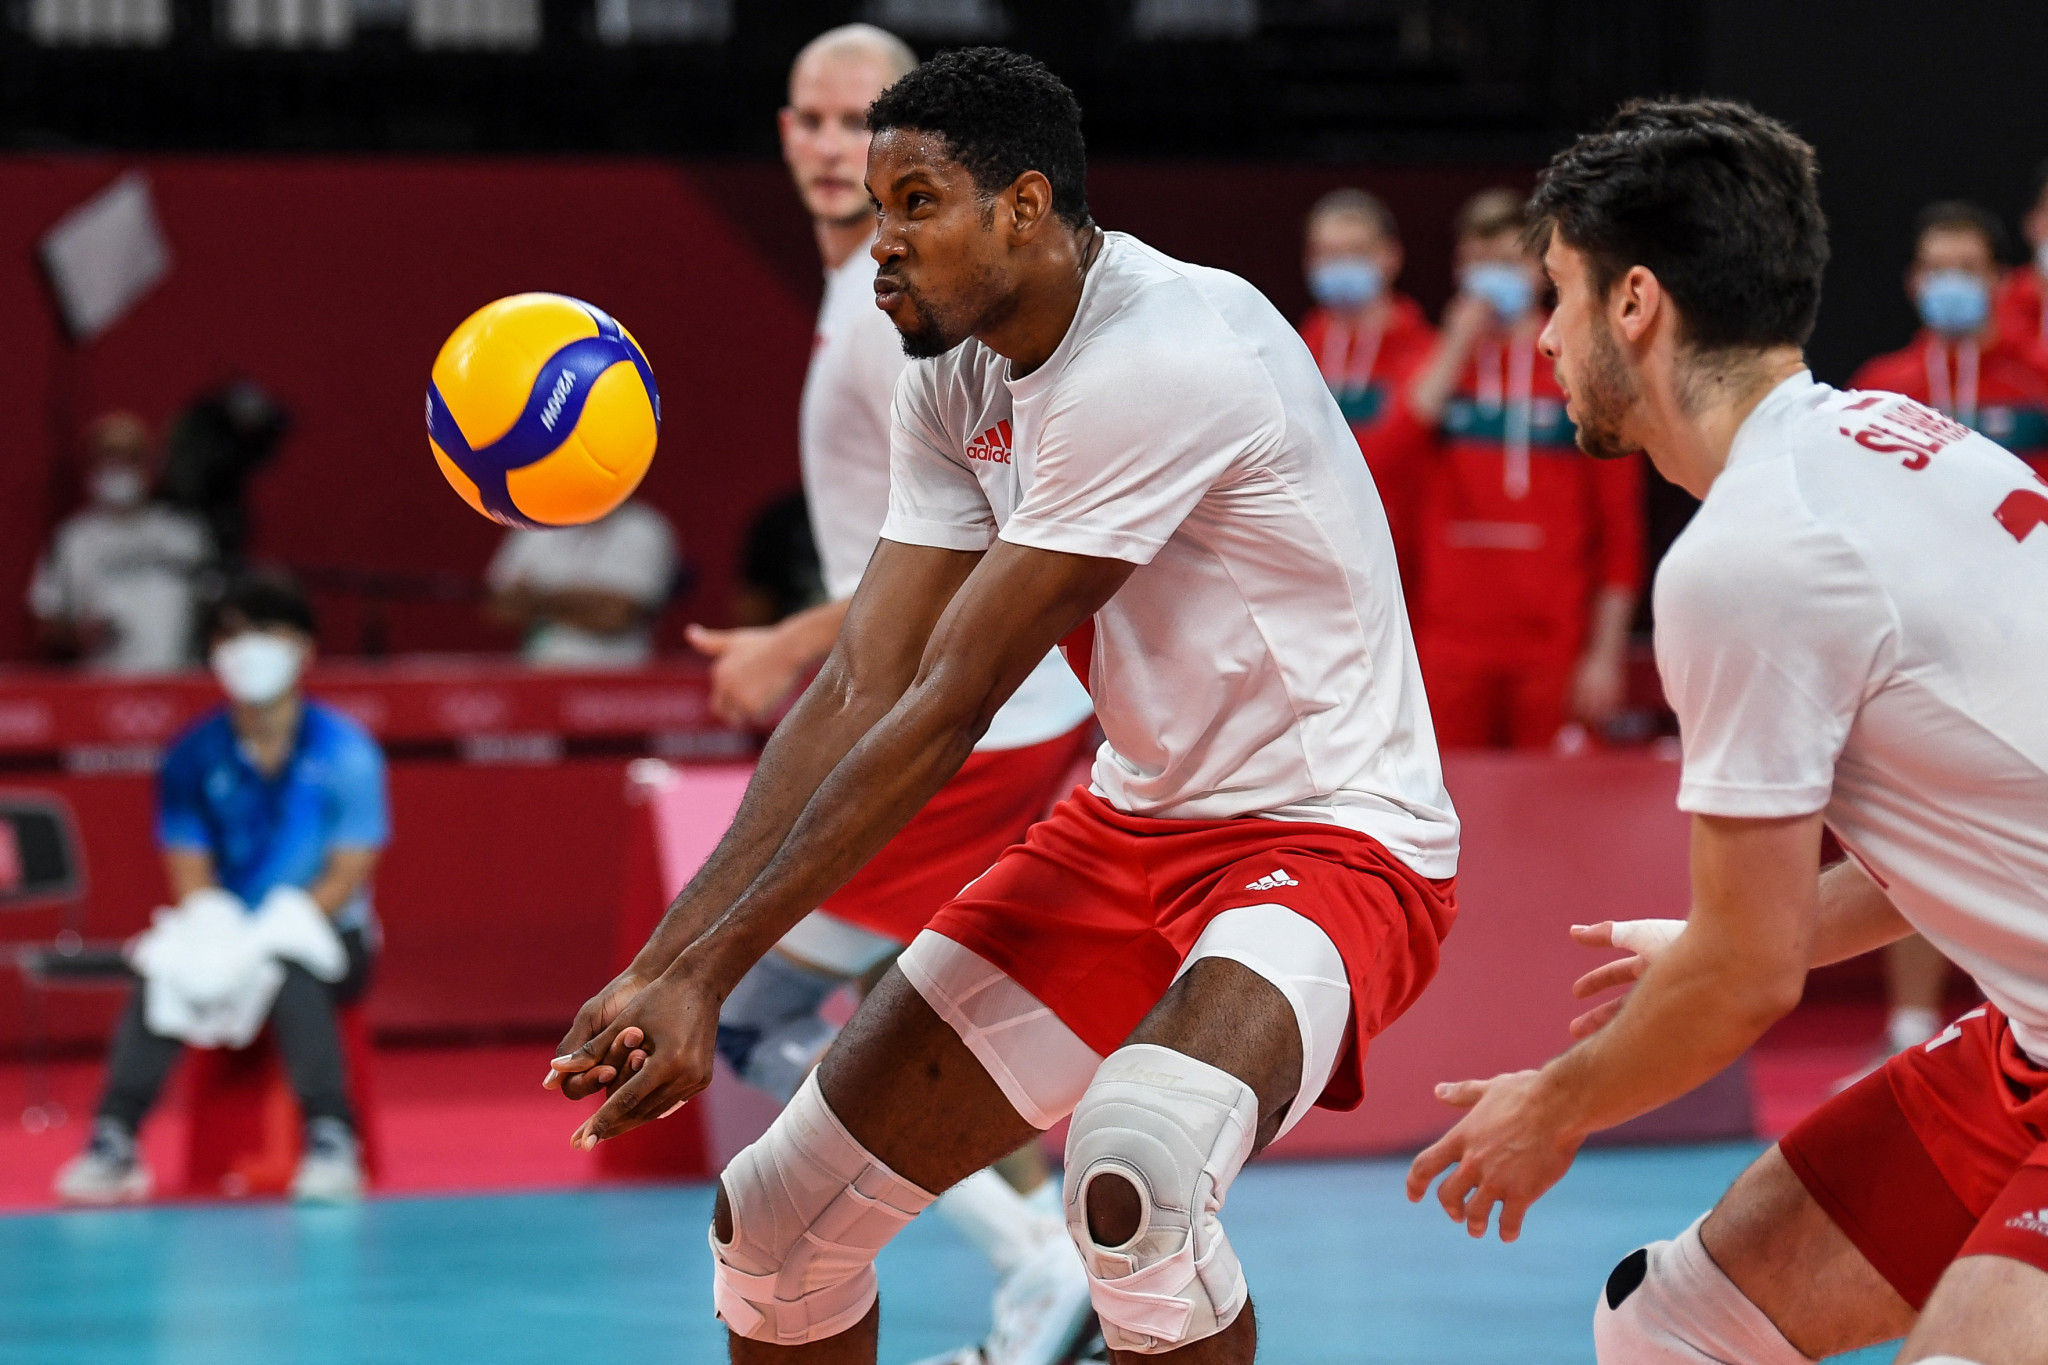 Men's Volleyball Nations League quarter-finalists to be decided in Osaka and Gdańsk